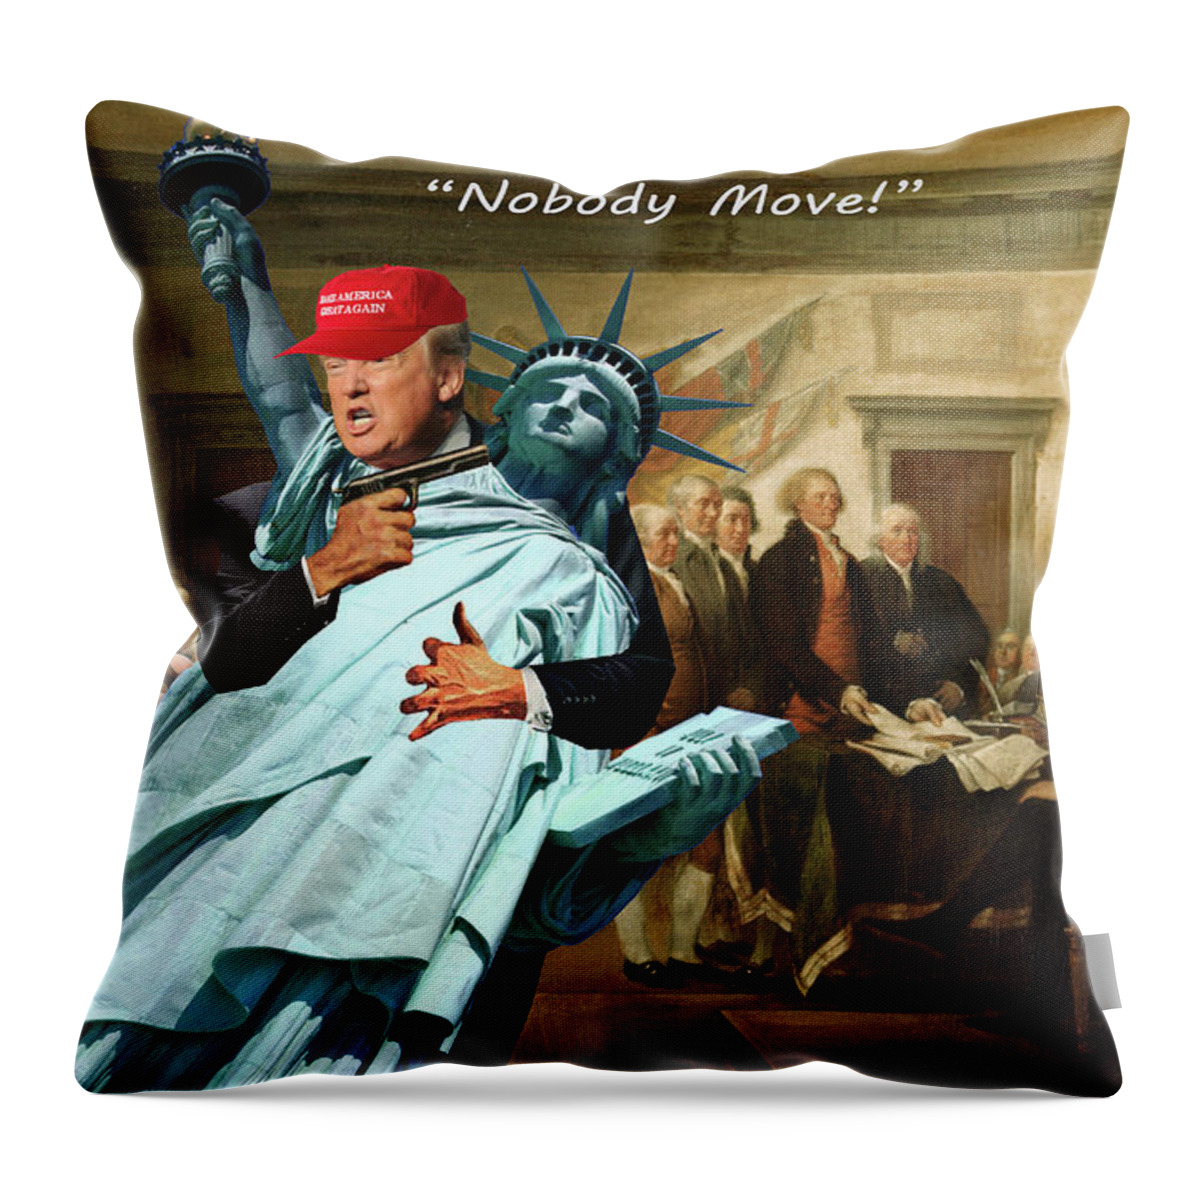 Donald Trump Throw Pillow featuring the digital art Nobody Move by Barry Kite